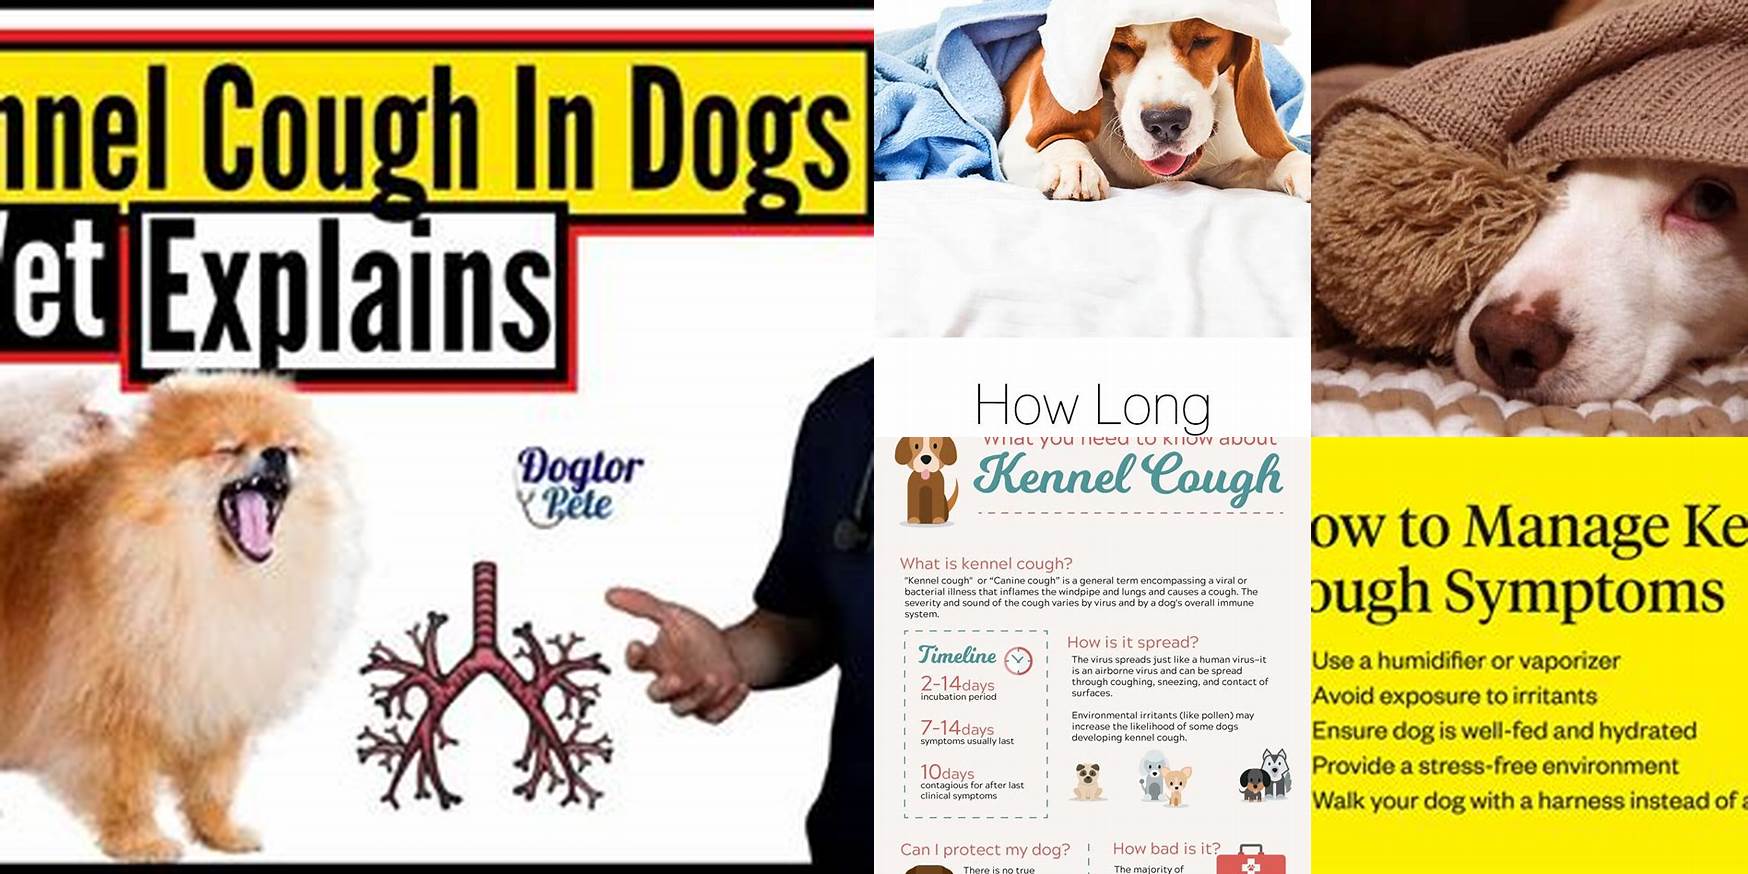 How Long Does Kennel Cough Last On Clothes